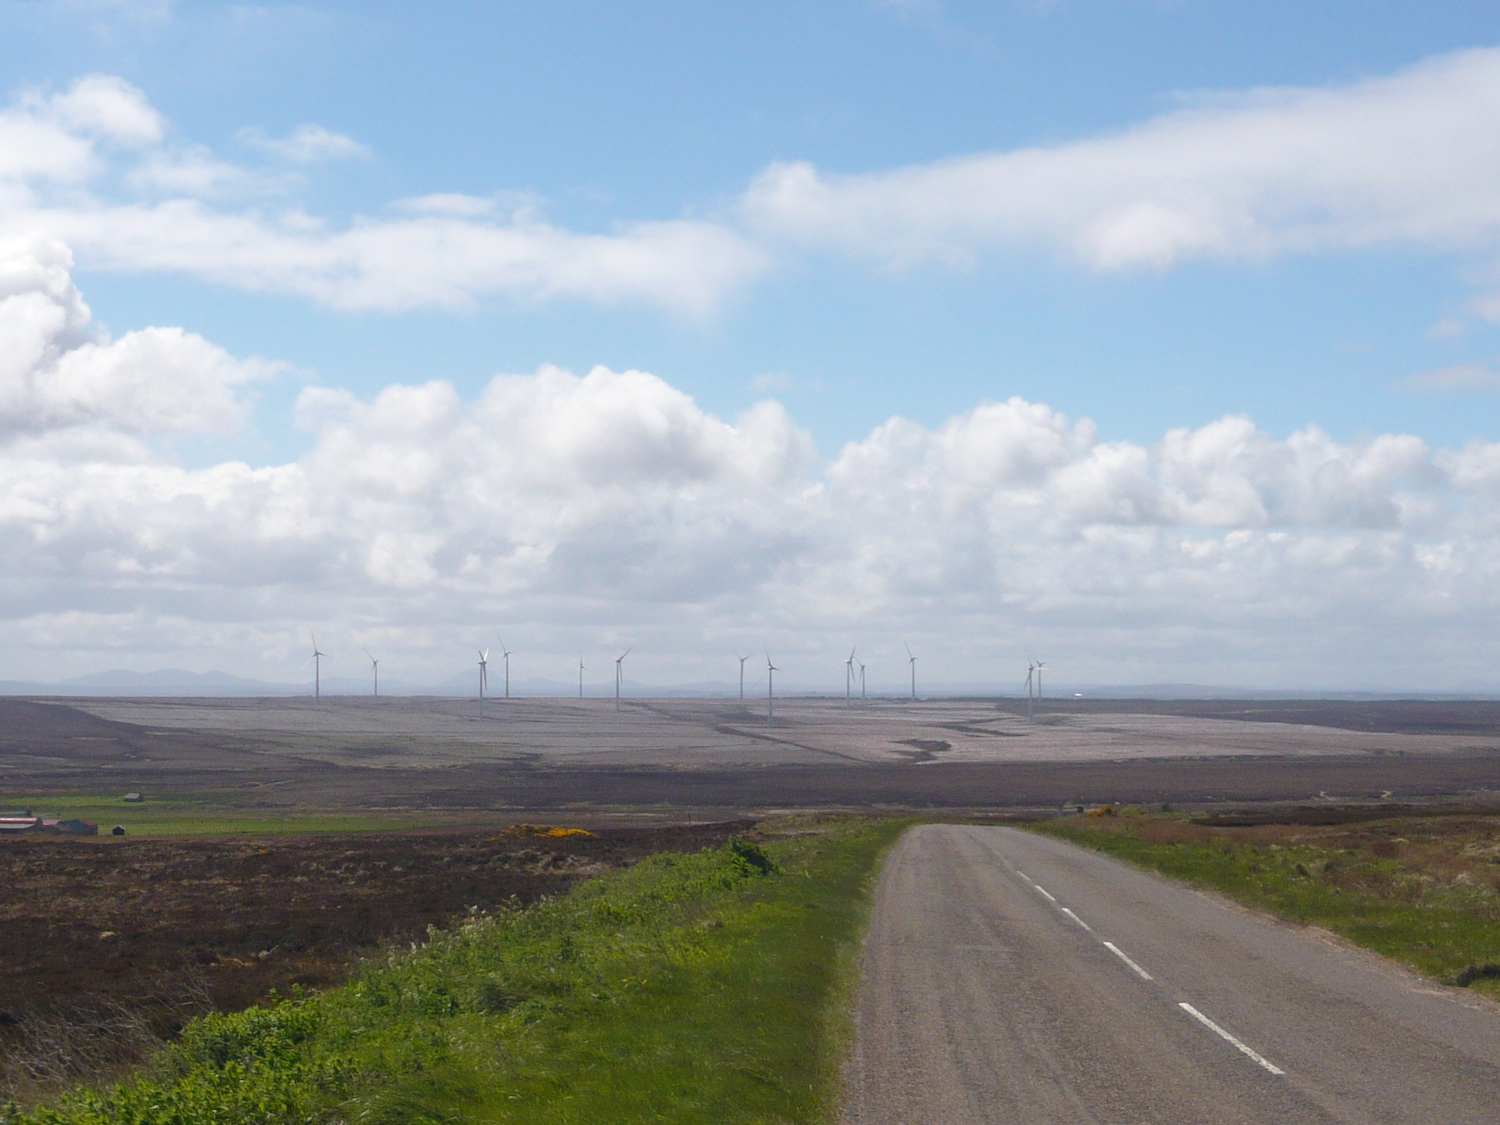 A wind farm appeared to be set in scorched earth. 